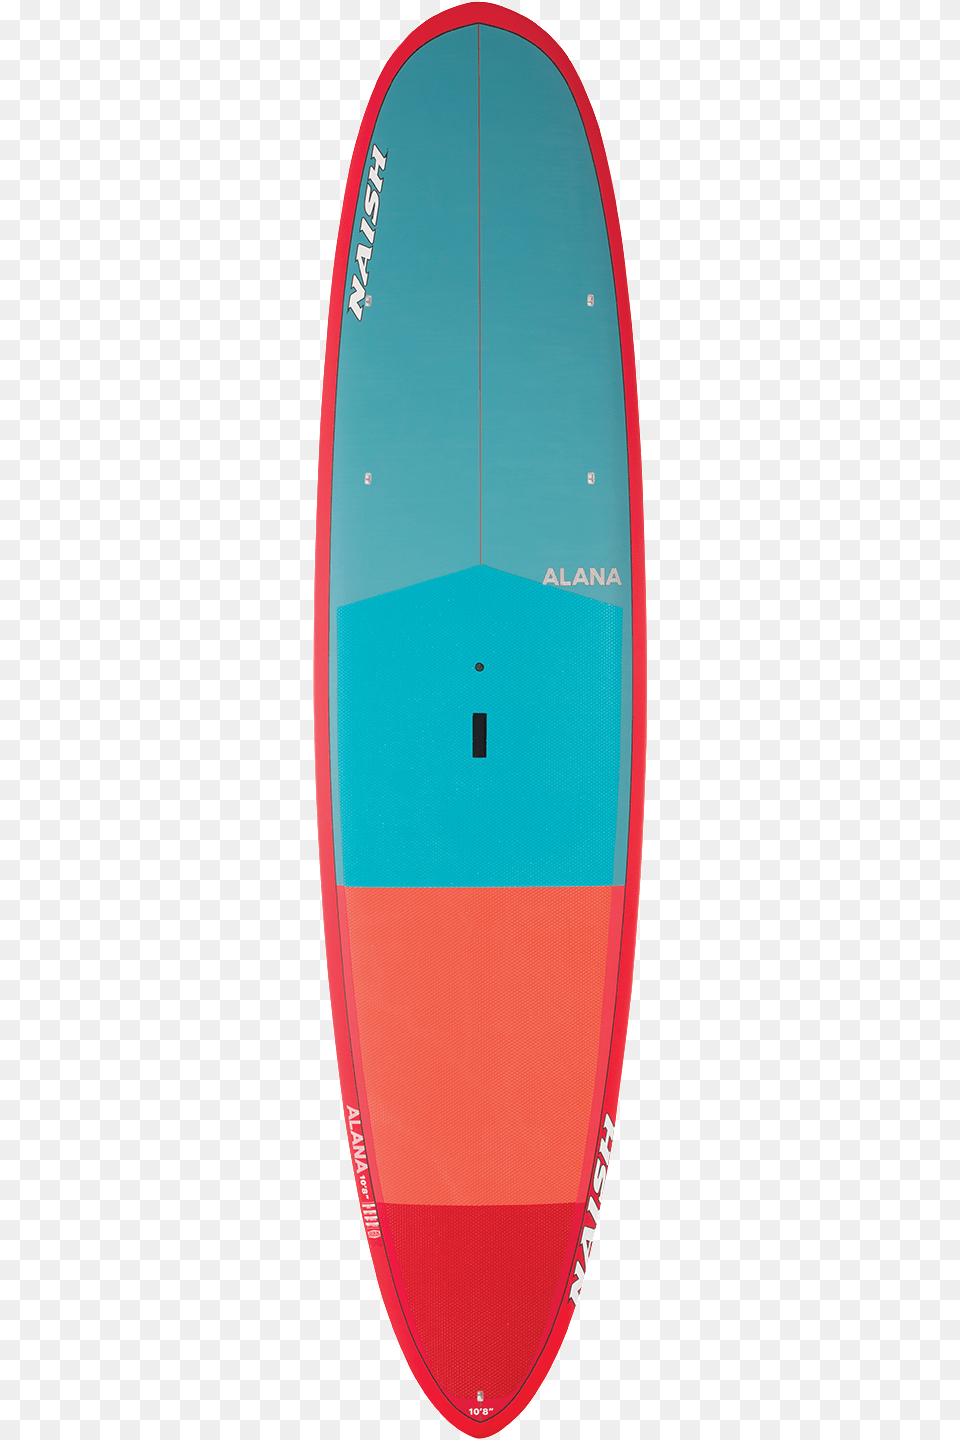 2019 Naish Alana Gsx Stand Up Paddle Board, Leisure Activities, Nature, Outdoors, Sea Free Png Download